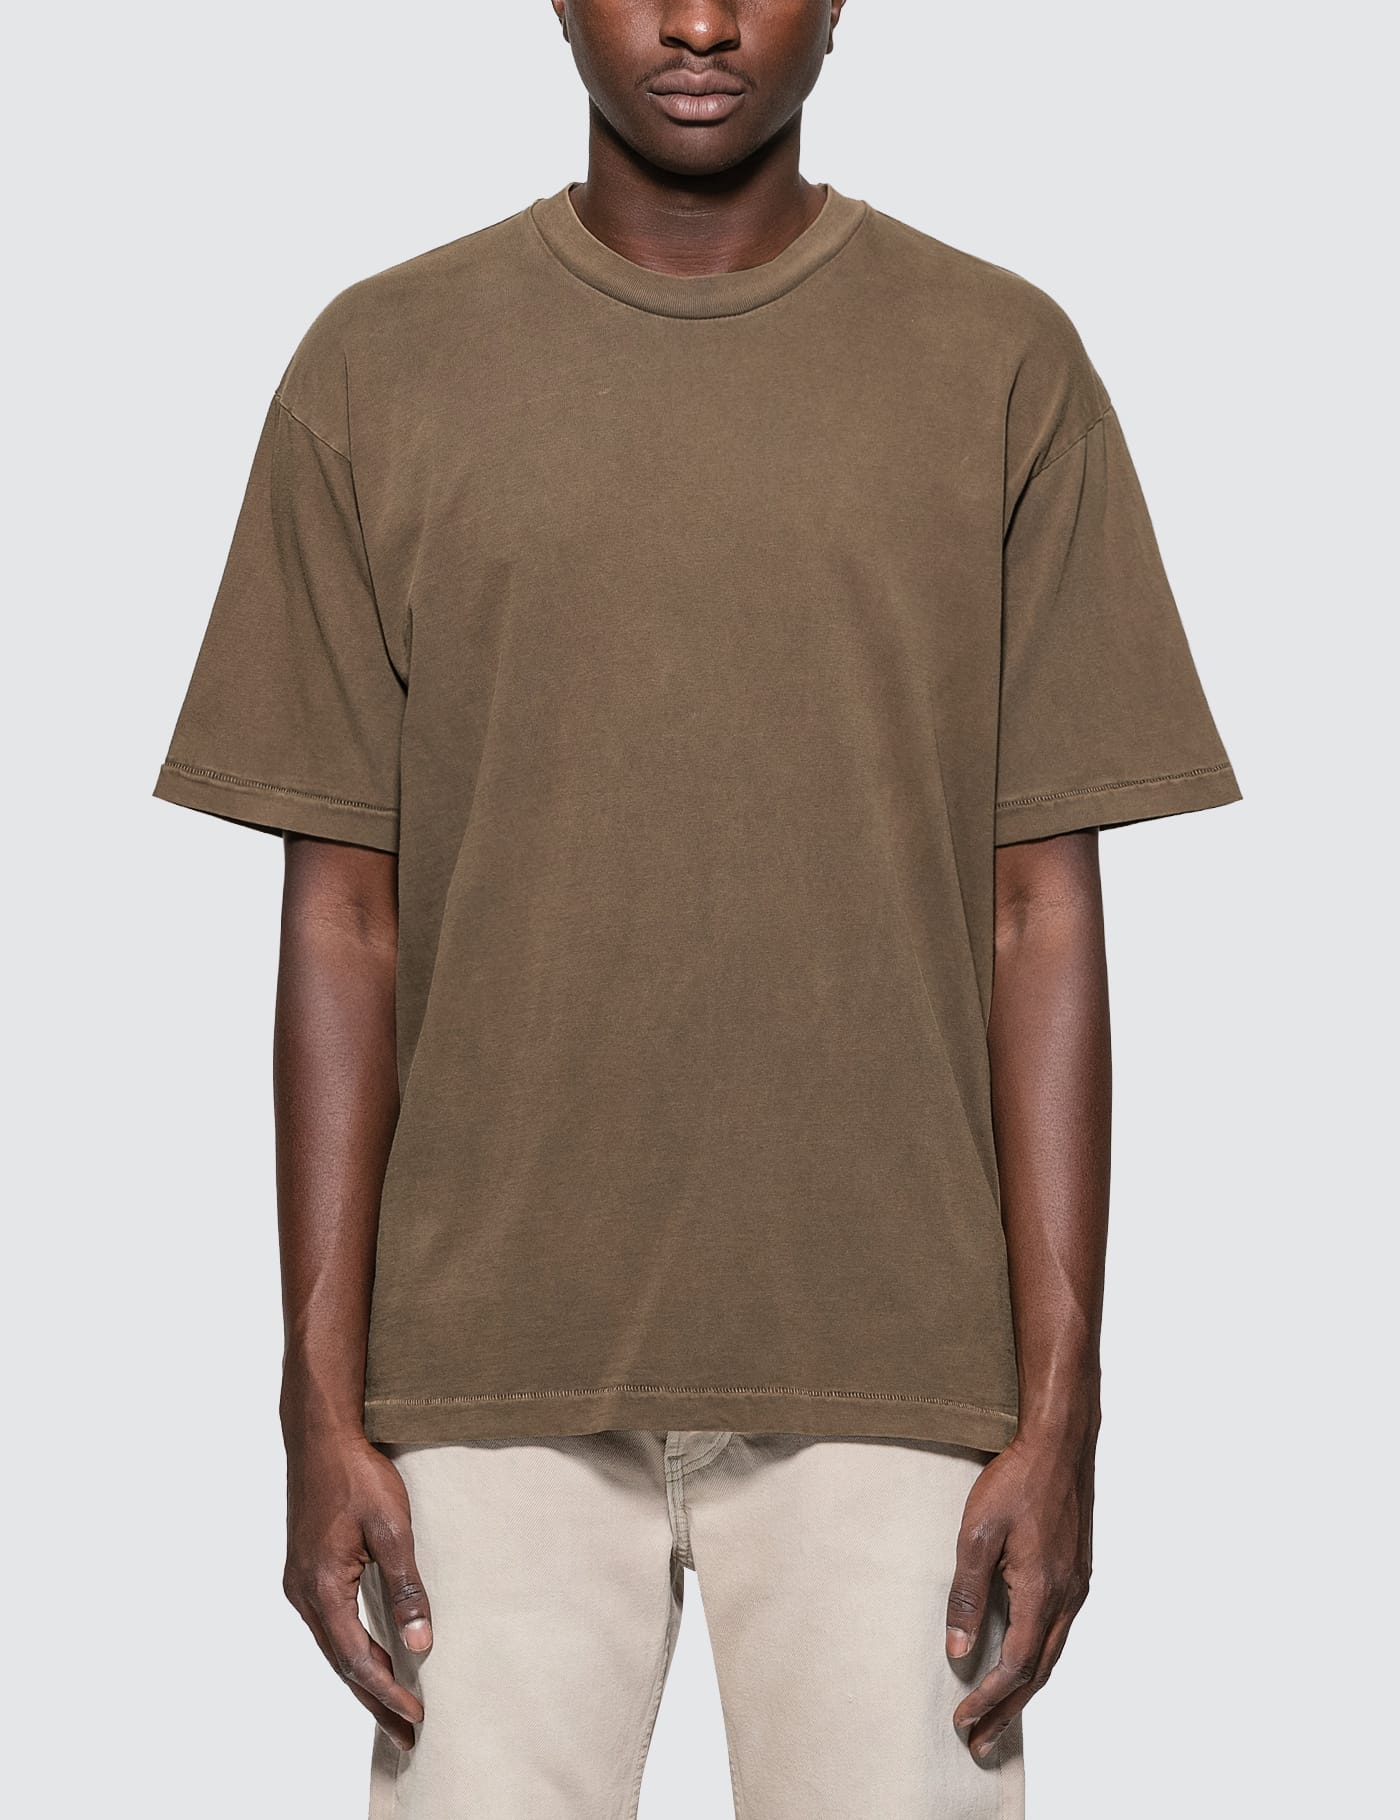 Yeezy Season 6 - Classic S/S T-Shirt | HBX - Globally Curated